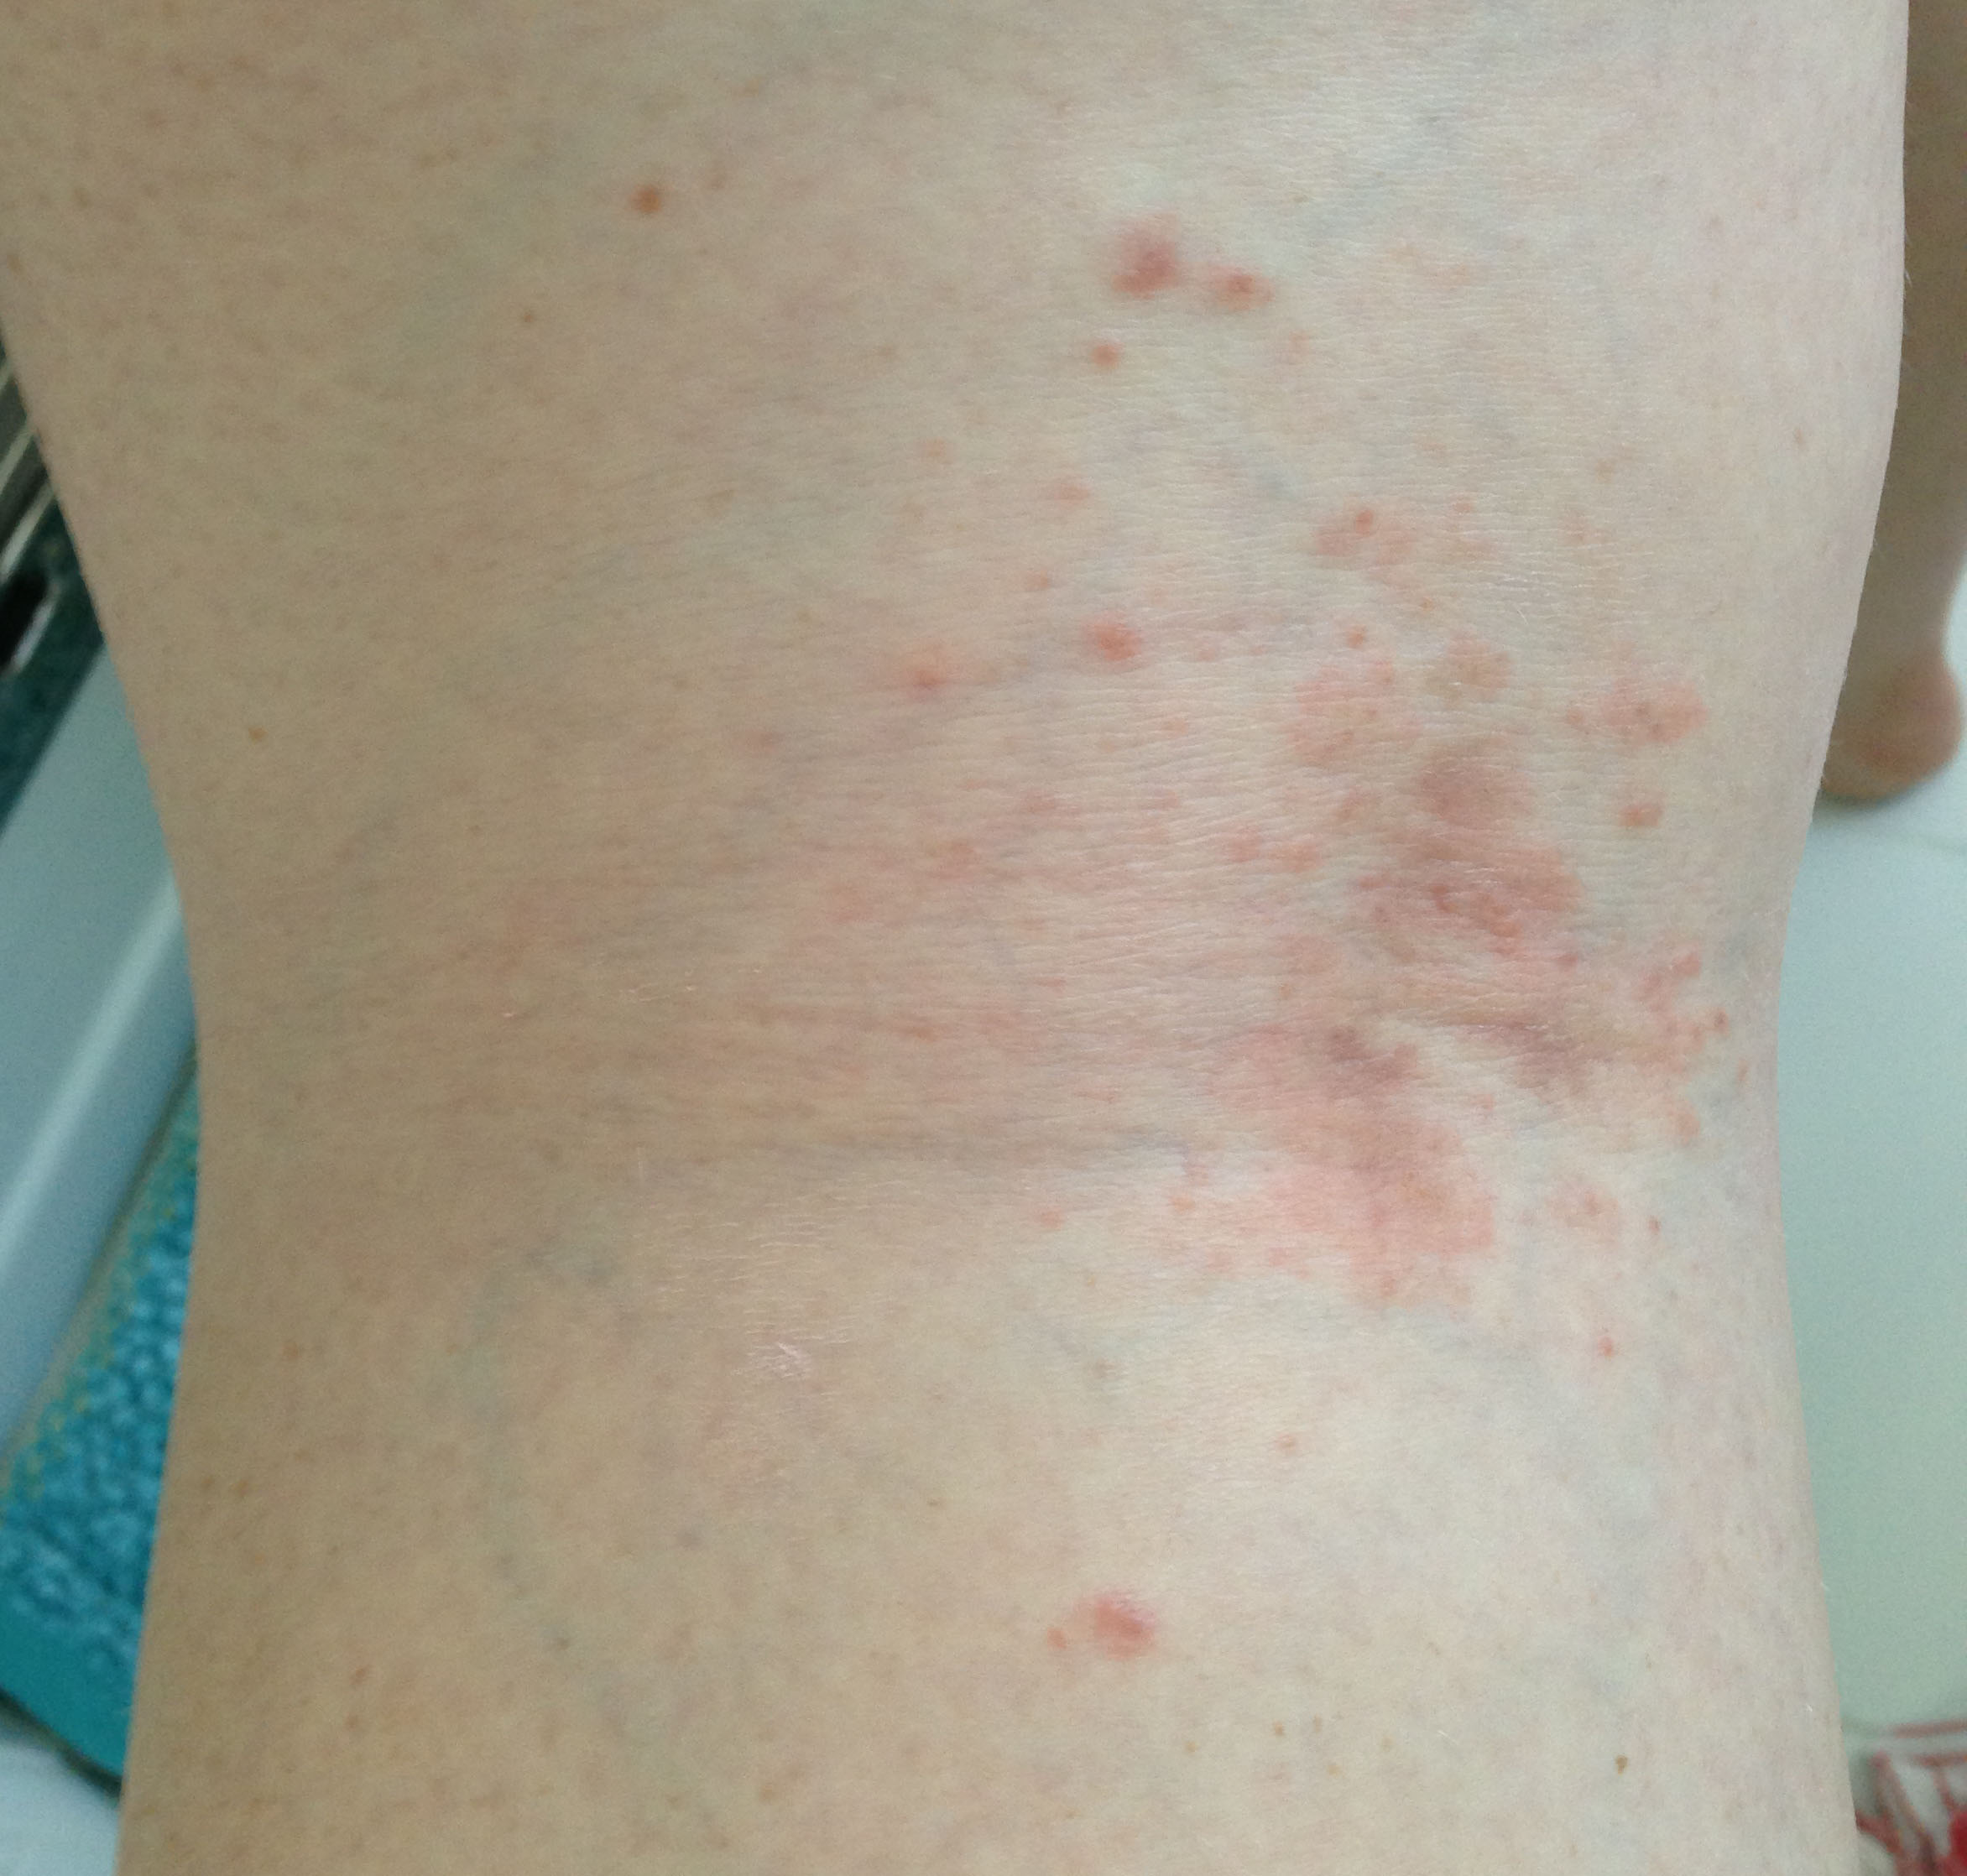 itchy rash buttocks candida infection bumpy groin